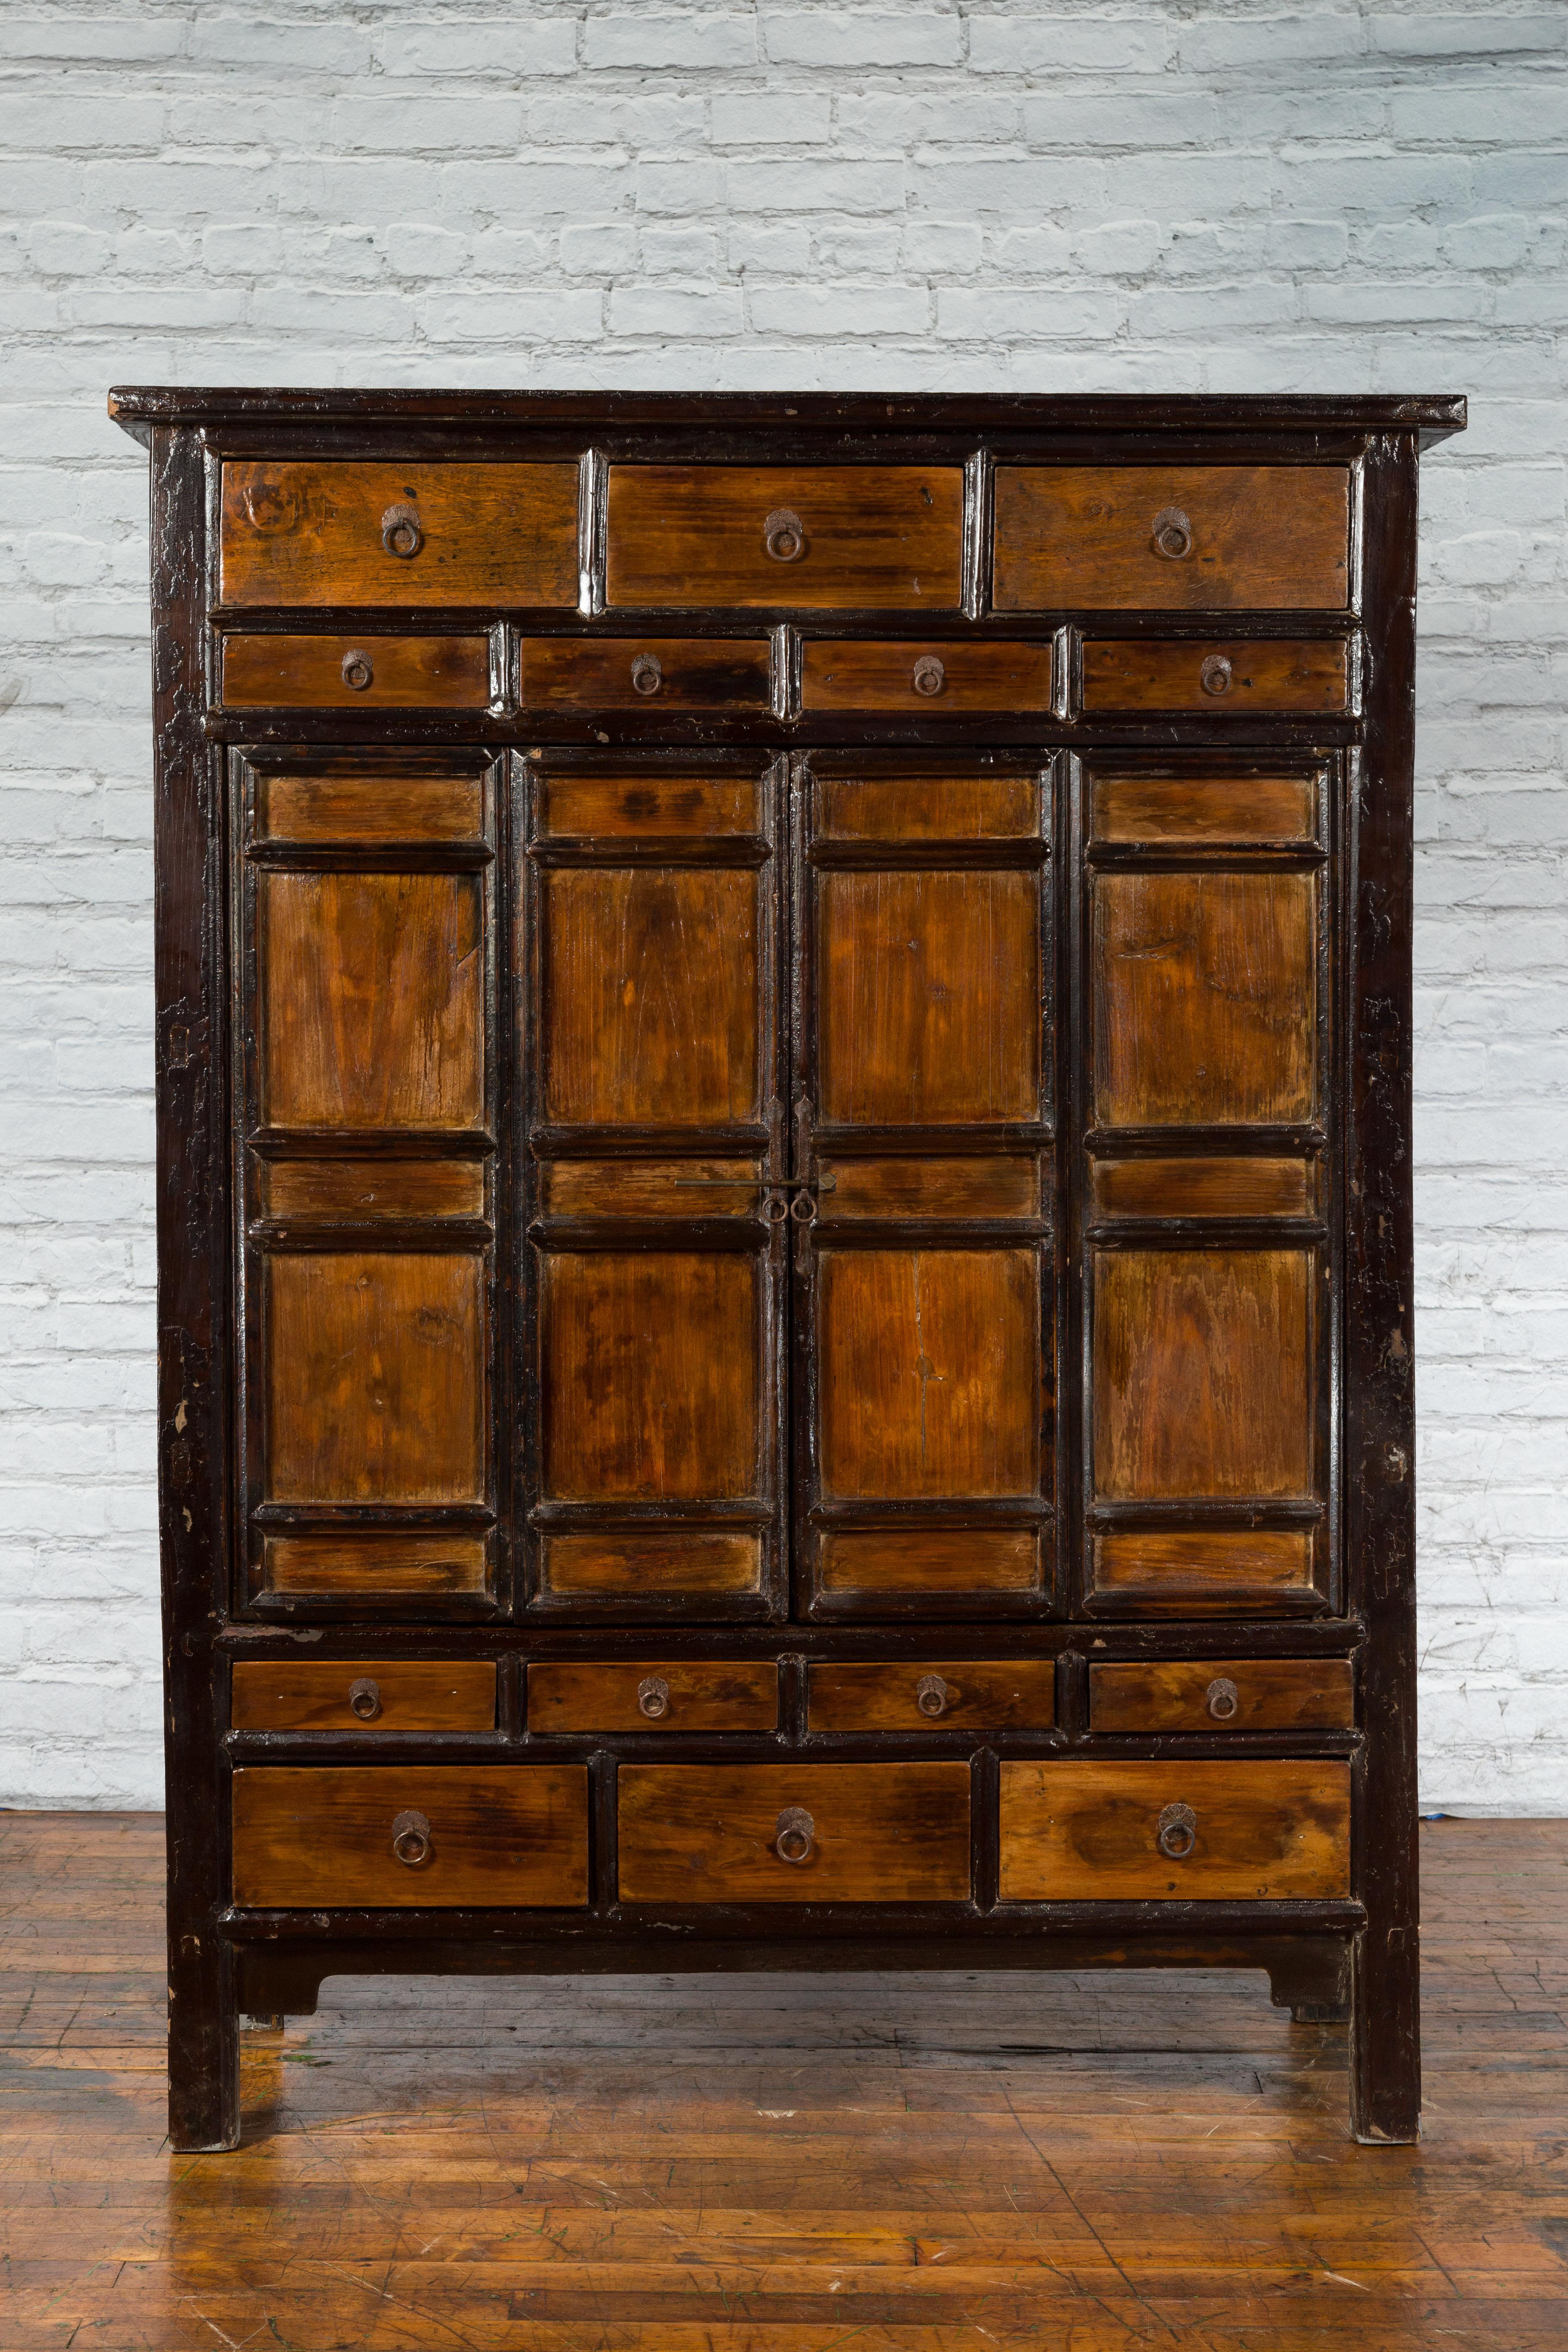 A large Chinese Qing Dynasty period armoire cabinet from the early 20th century with 14 drawers and two accordion doors. Created in China during Qing Dynasty in the early years of the 20th century, this cabinet attracts our attention with its